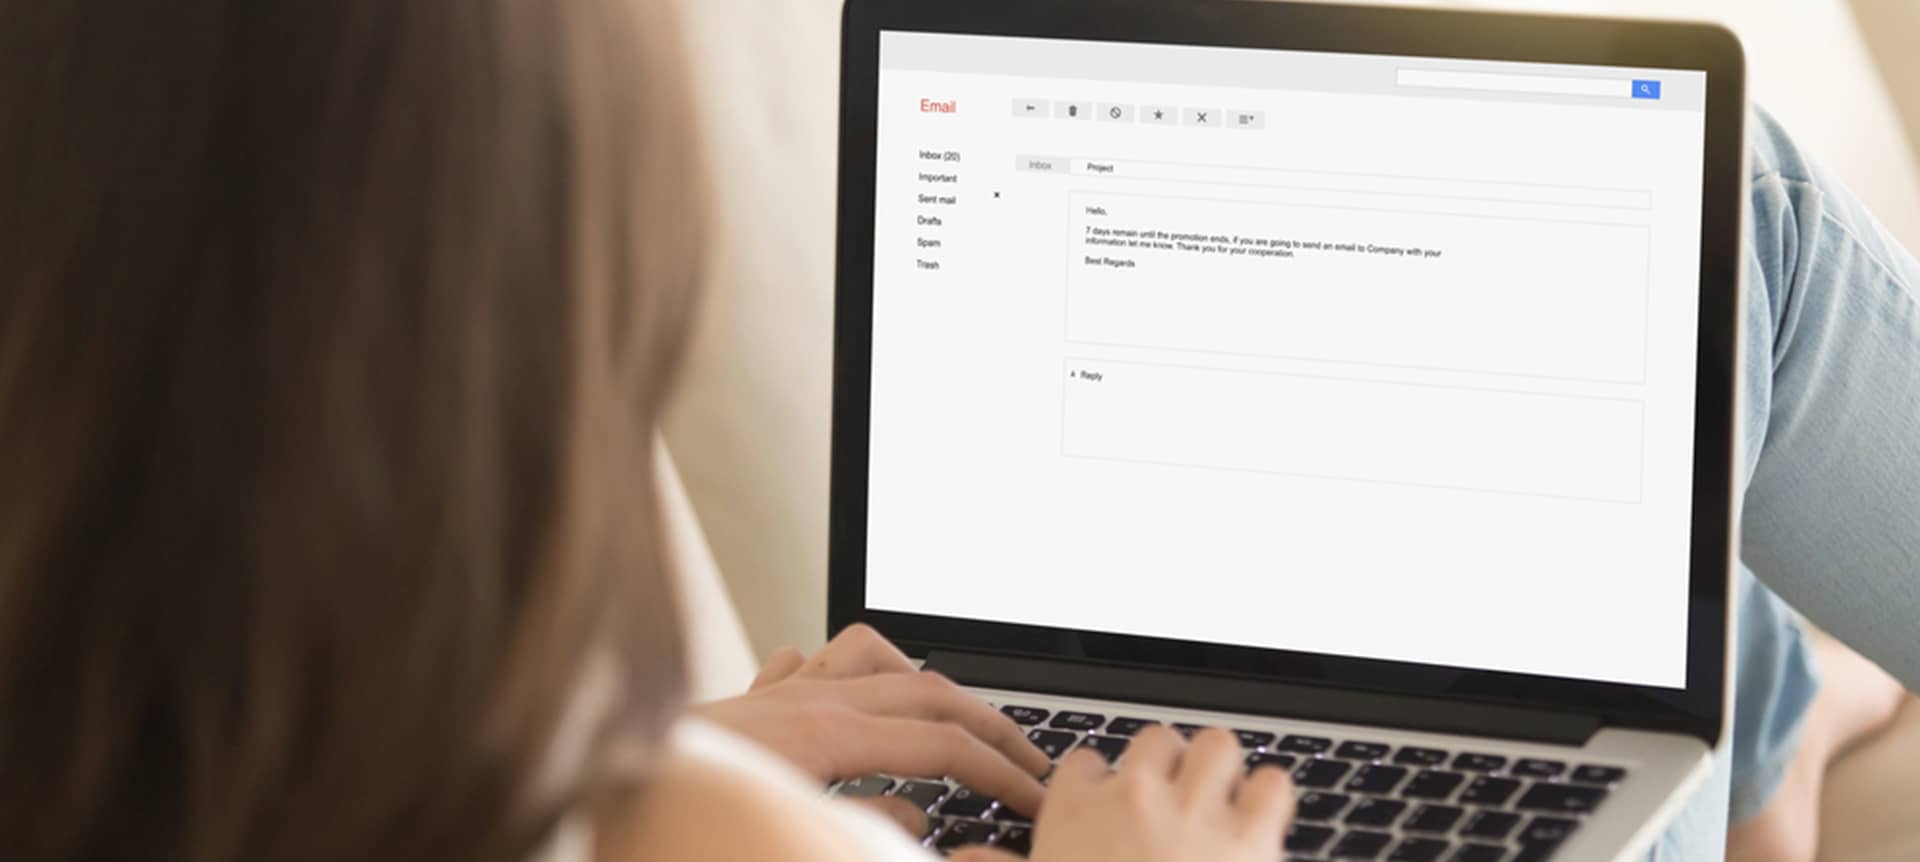 Talent Acquisition: 3 Amazing Email Templates for Sourcing Sales Candidates